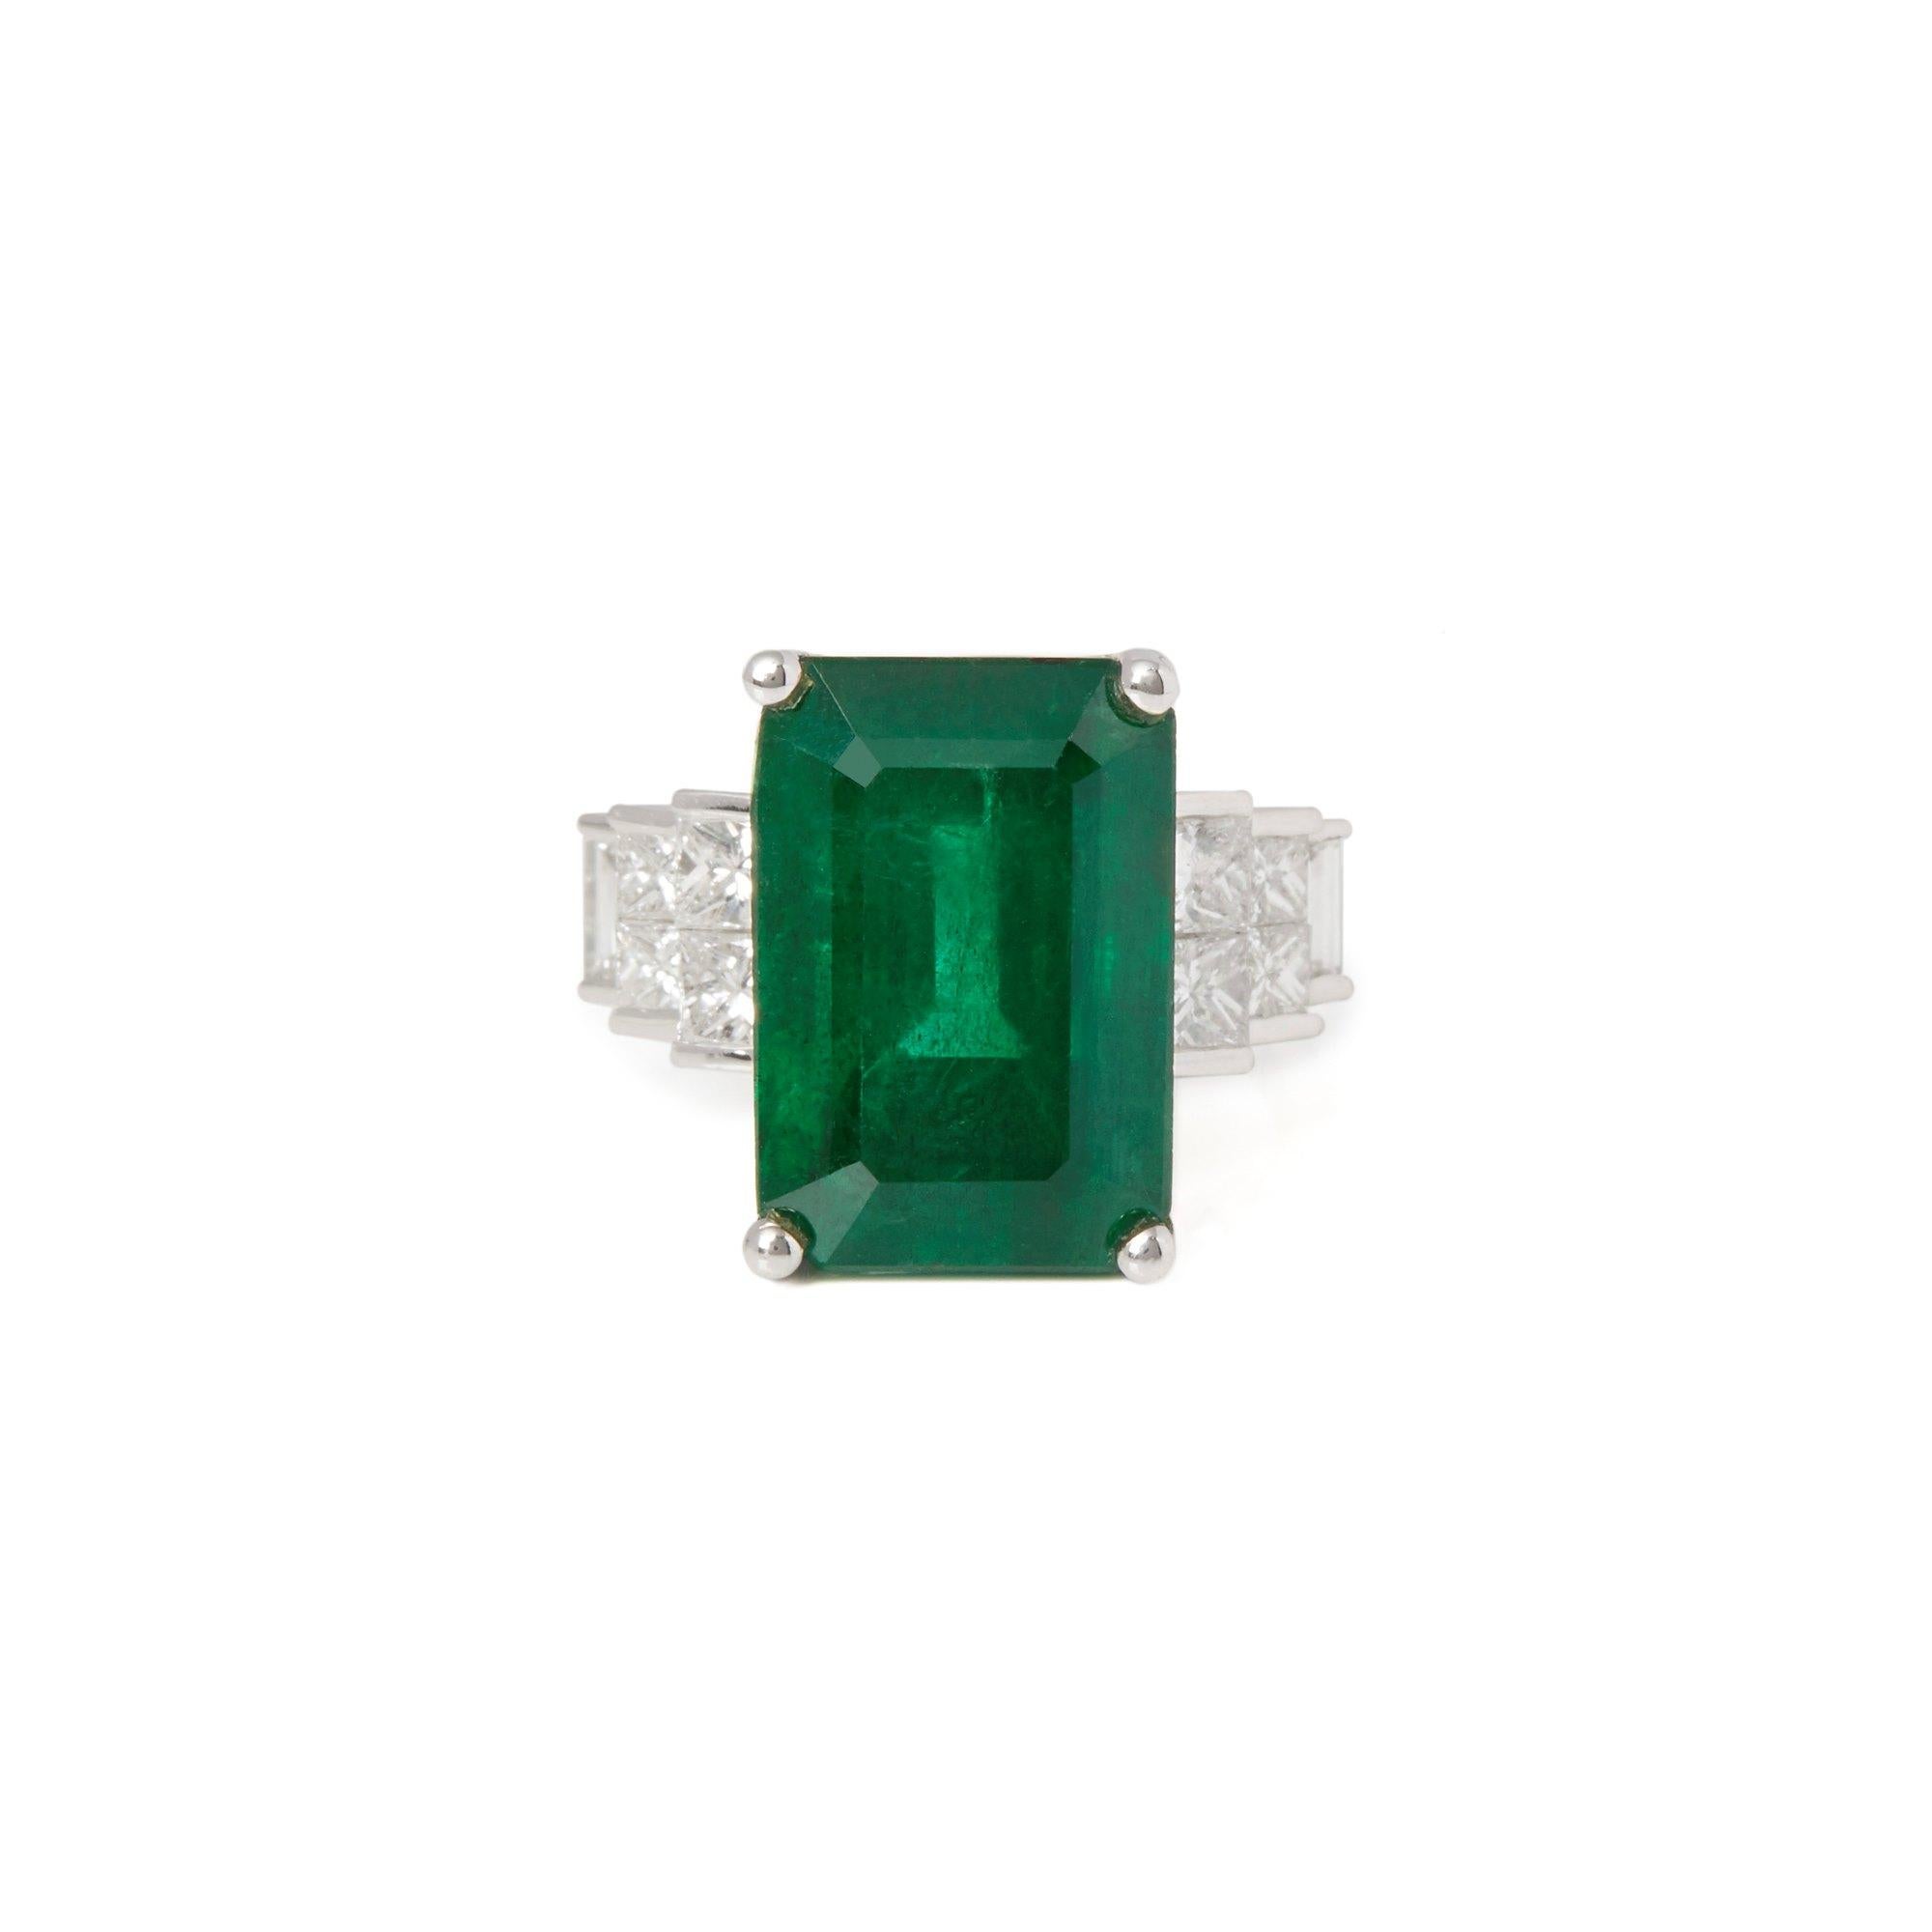 This ring designed by David Jerome is from his private collection and features one Emerald cut Emerald totalling 13.77cts sourced in the kagem mine Zambia. Set with princess cut Diamonds totalling 1.26cts mounted in an 18k white gold Art Decco style